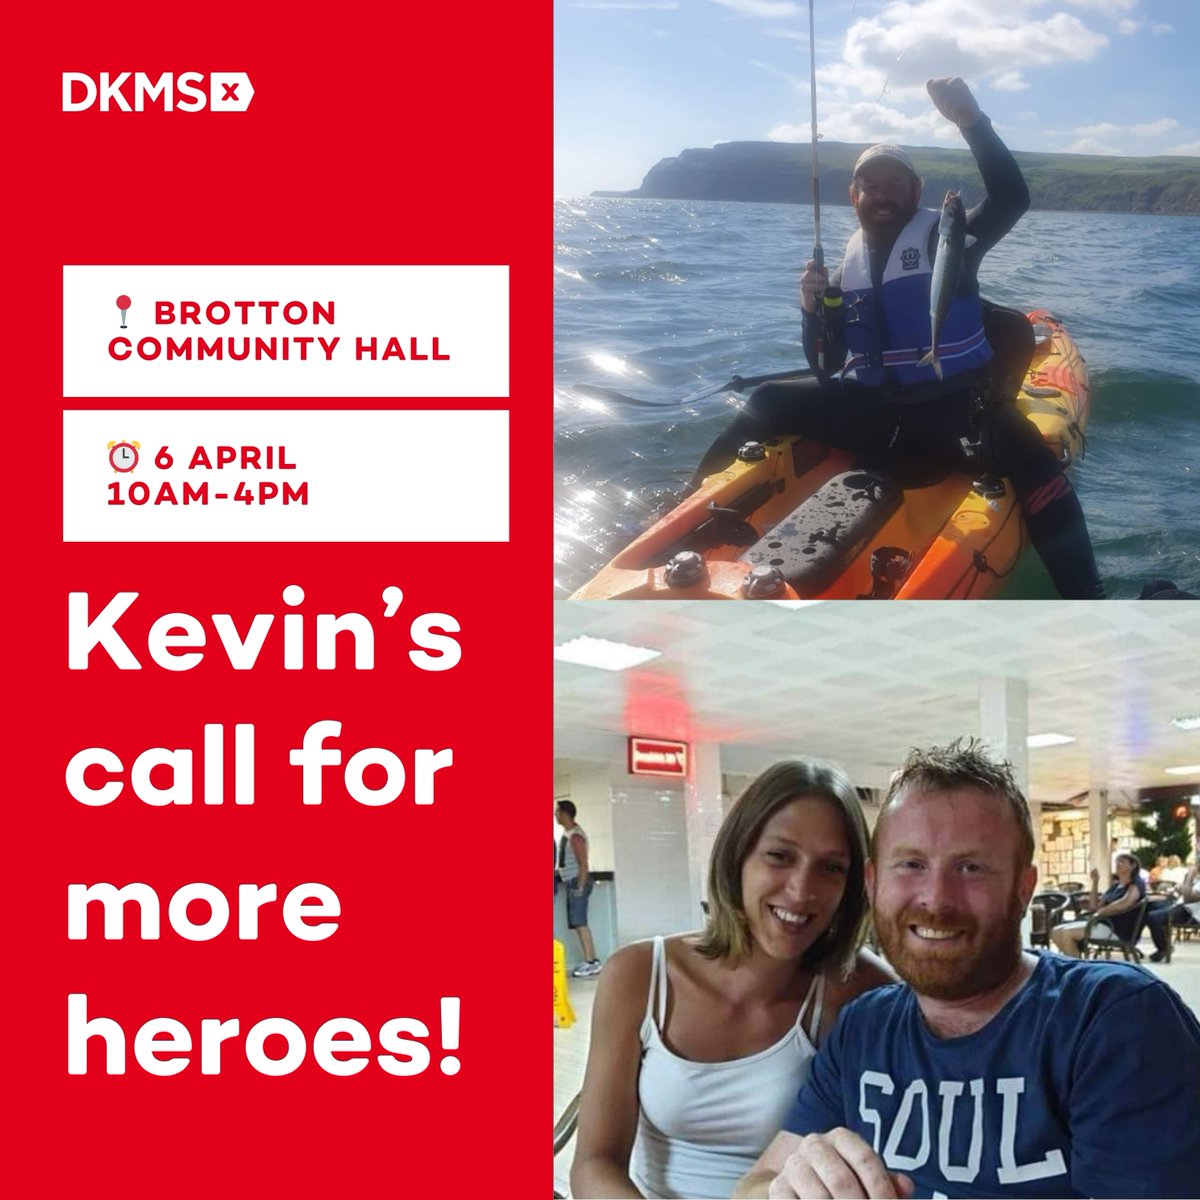 📢 Don't forget - Kevin is calling on YOU! Share this post and come and register as a stem cell donor in #Brotton this Saturday 6 April. Let's join Kevin in bringing hope to people with blood cancer. Spread the word and mark your calendars. See you there!